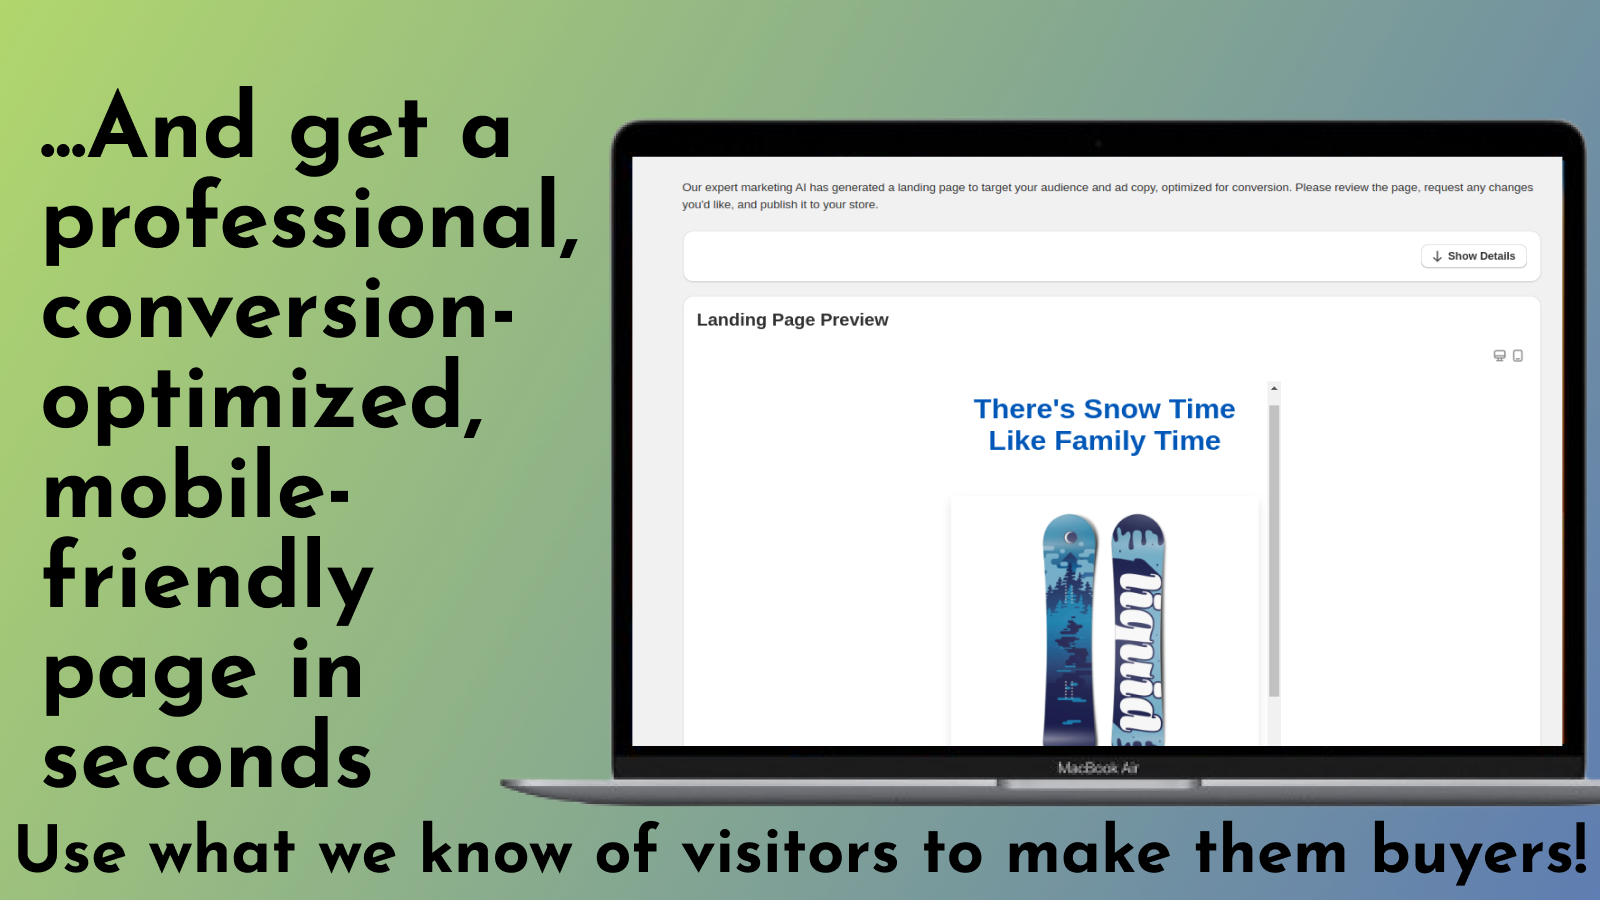 And get a conversion-optimized, mobile-friendly page in seconds